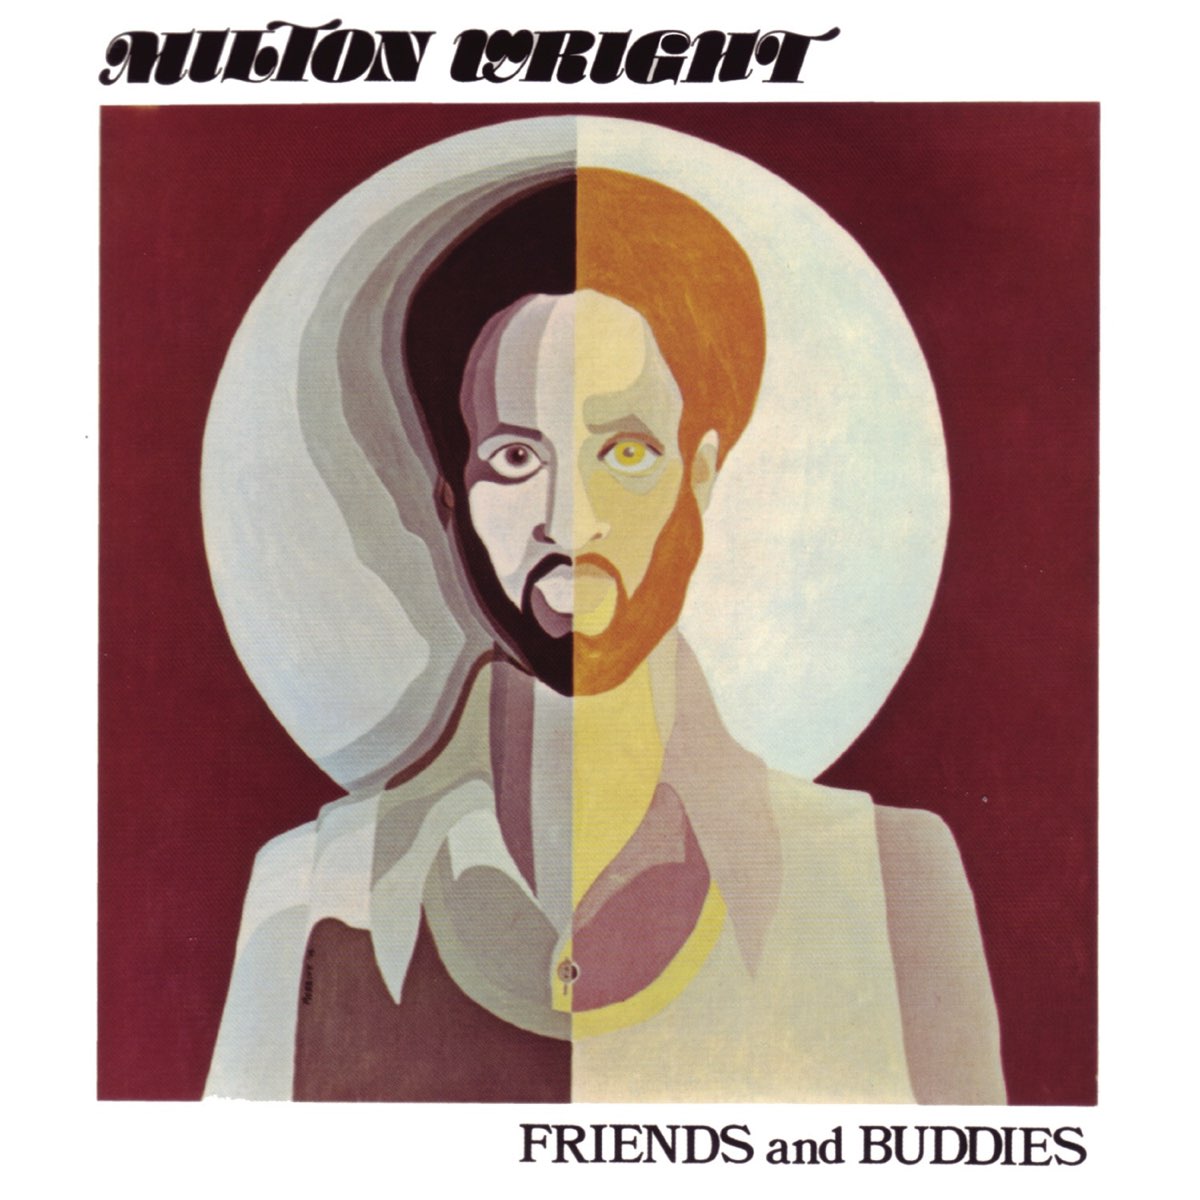 WRIGHT, MILTON "FRIENDS AND BUDDIES" VINYLE